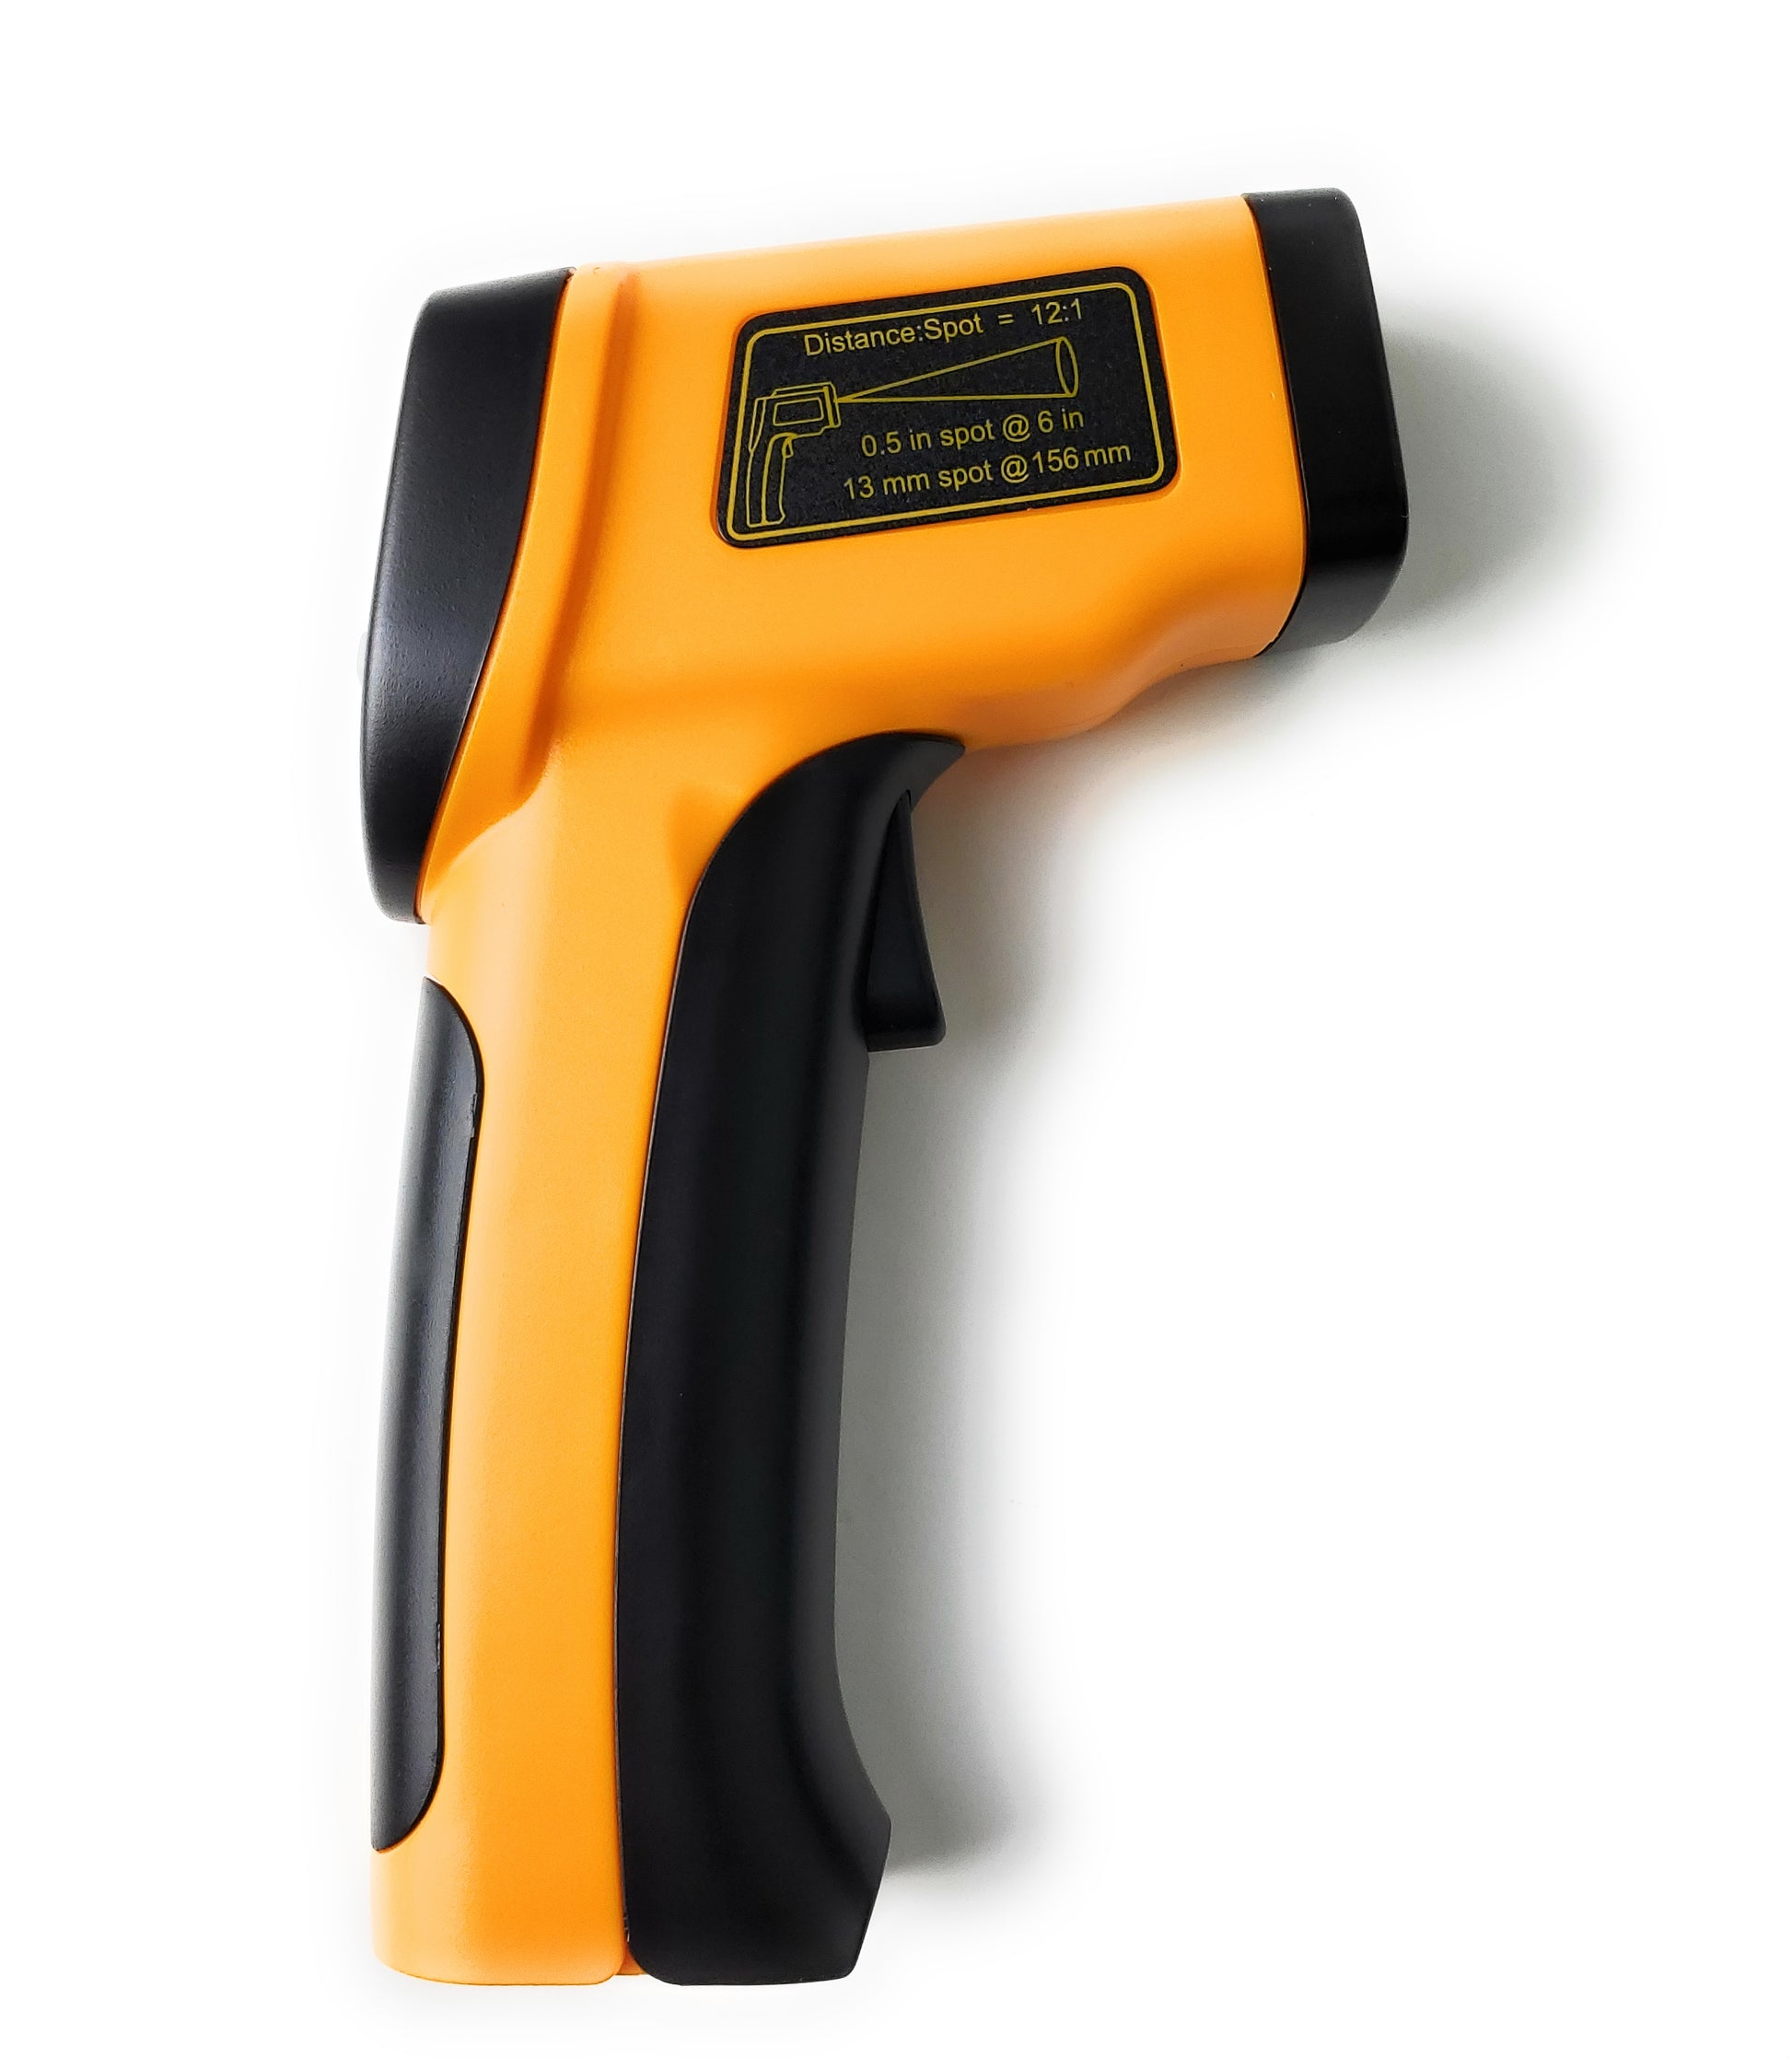 Industrial Infrared Thermometer, Laser IR Thermometer, -58℉~ 1202℉ (-5 –  labnique